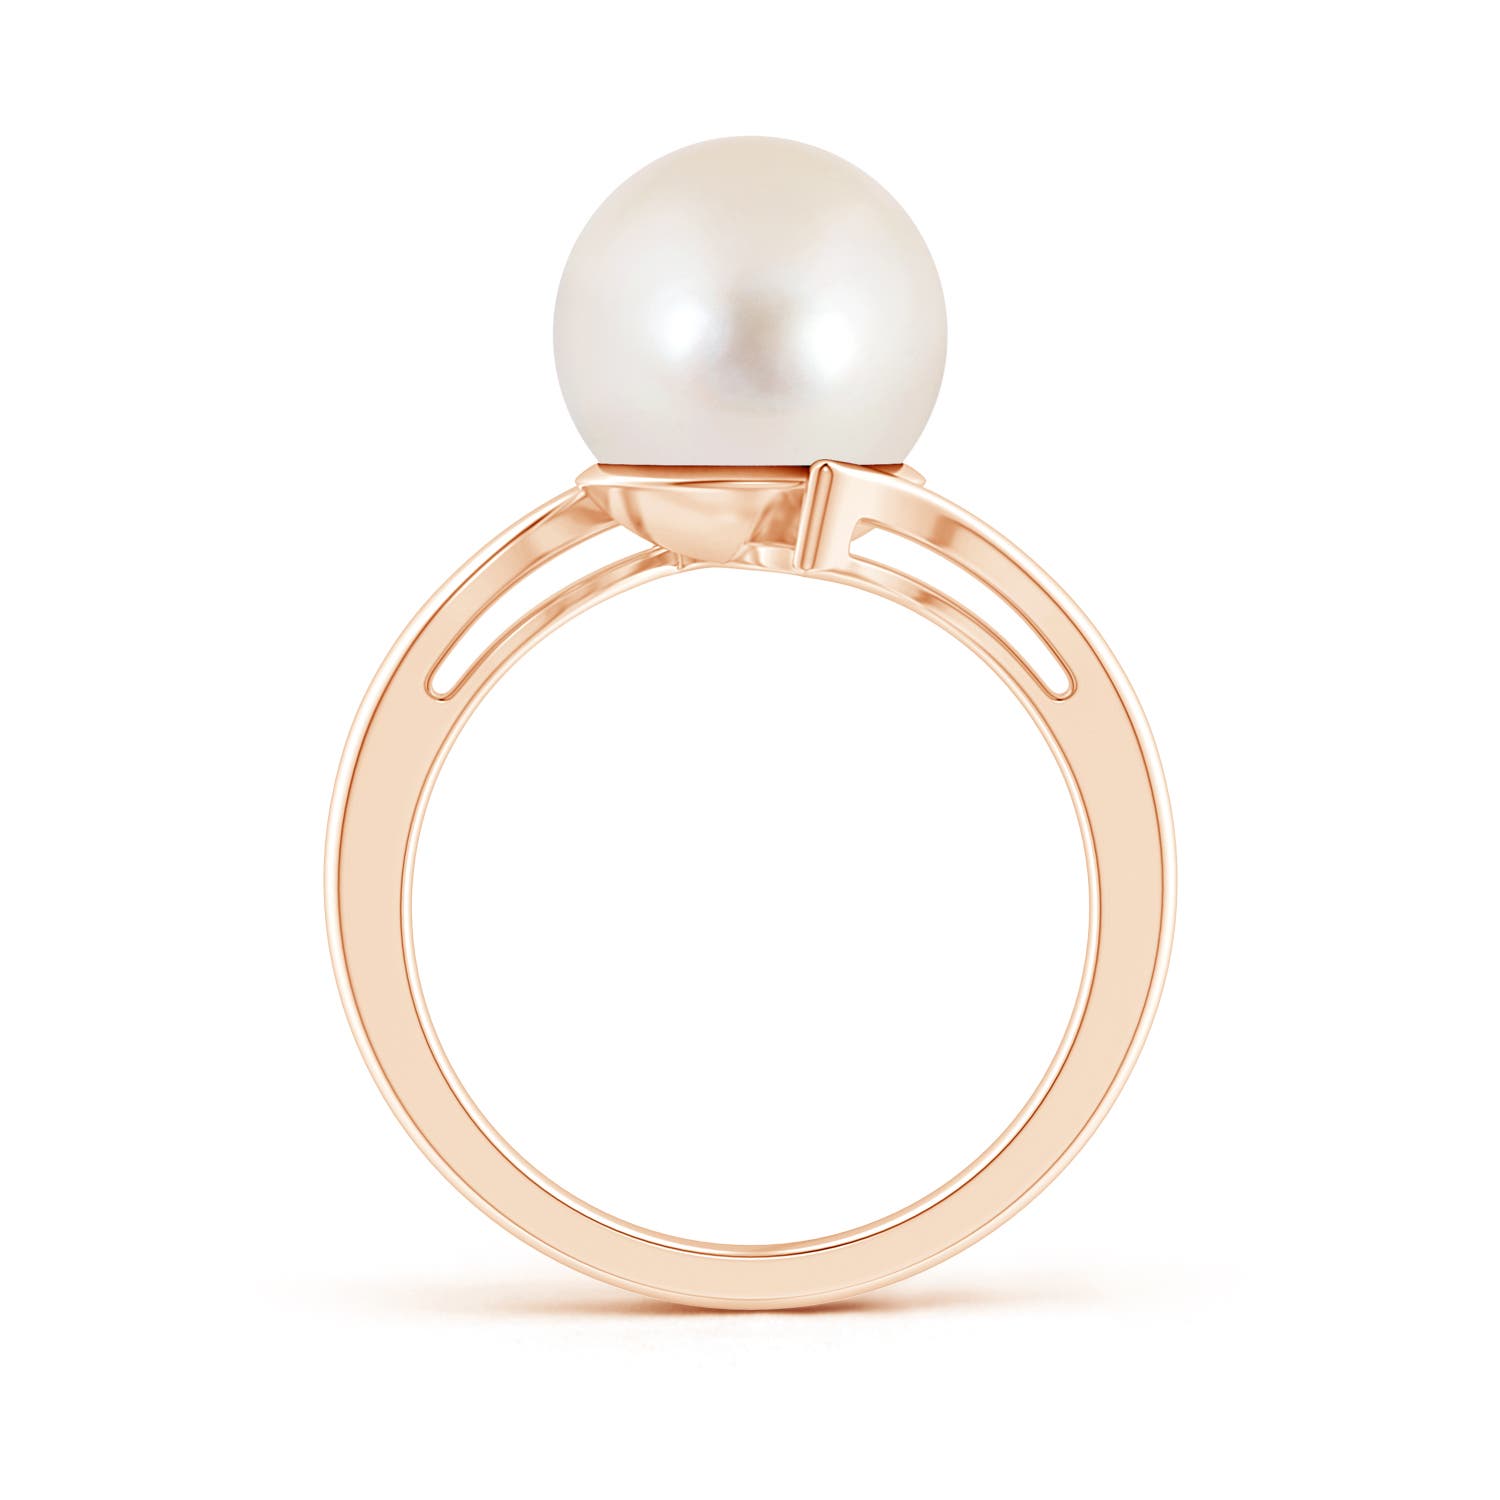 AAAA / 7.2 CT / 14 KT Rose Gold